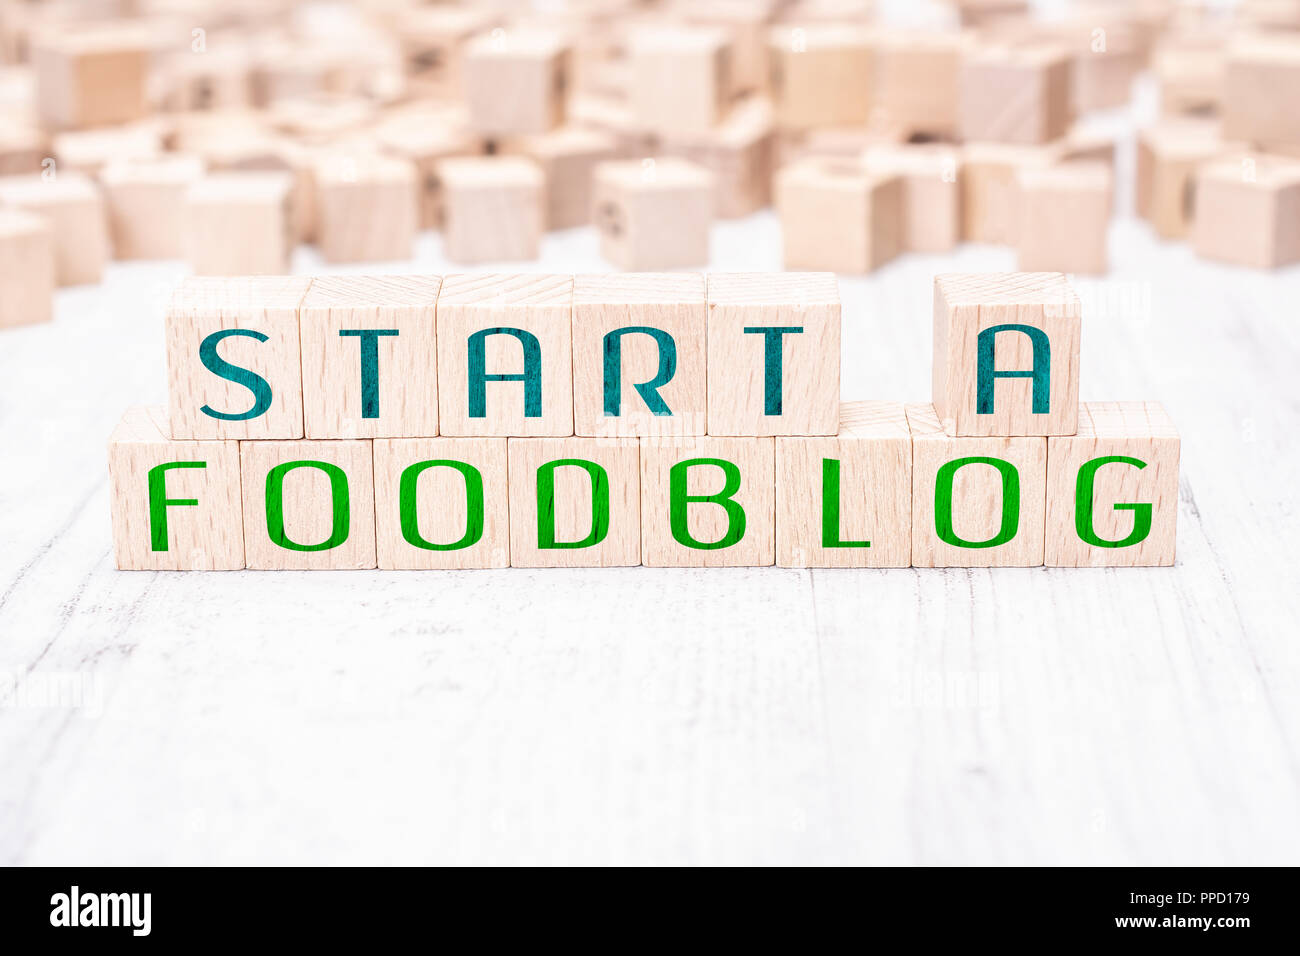 The Words Start A Foodblog Formed By Wooden Blocks On A White Table Stock Photo